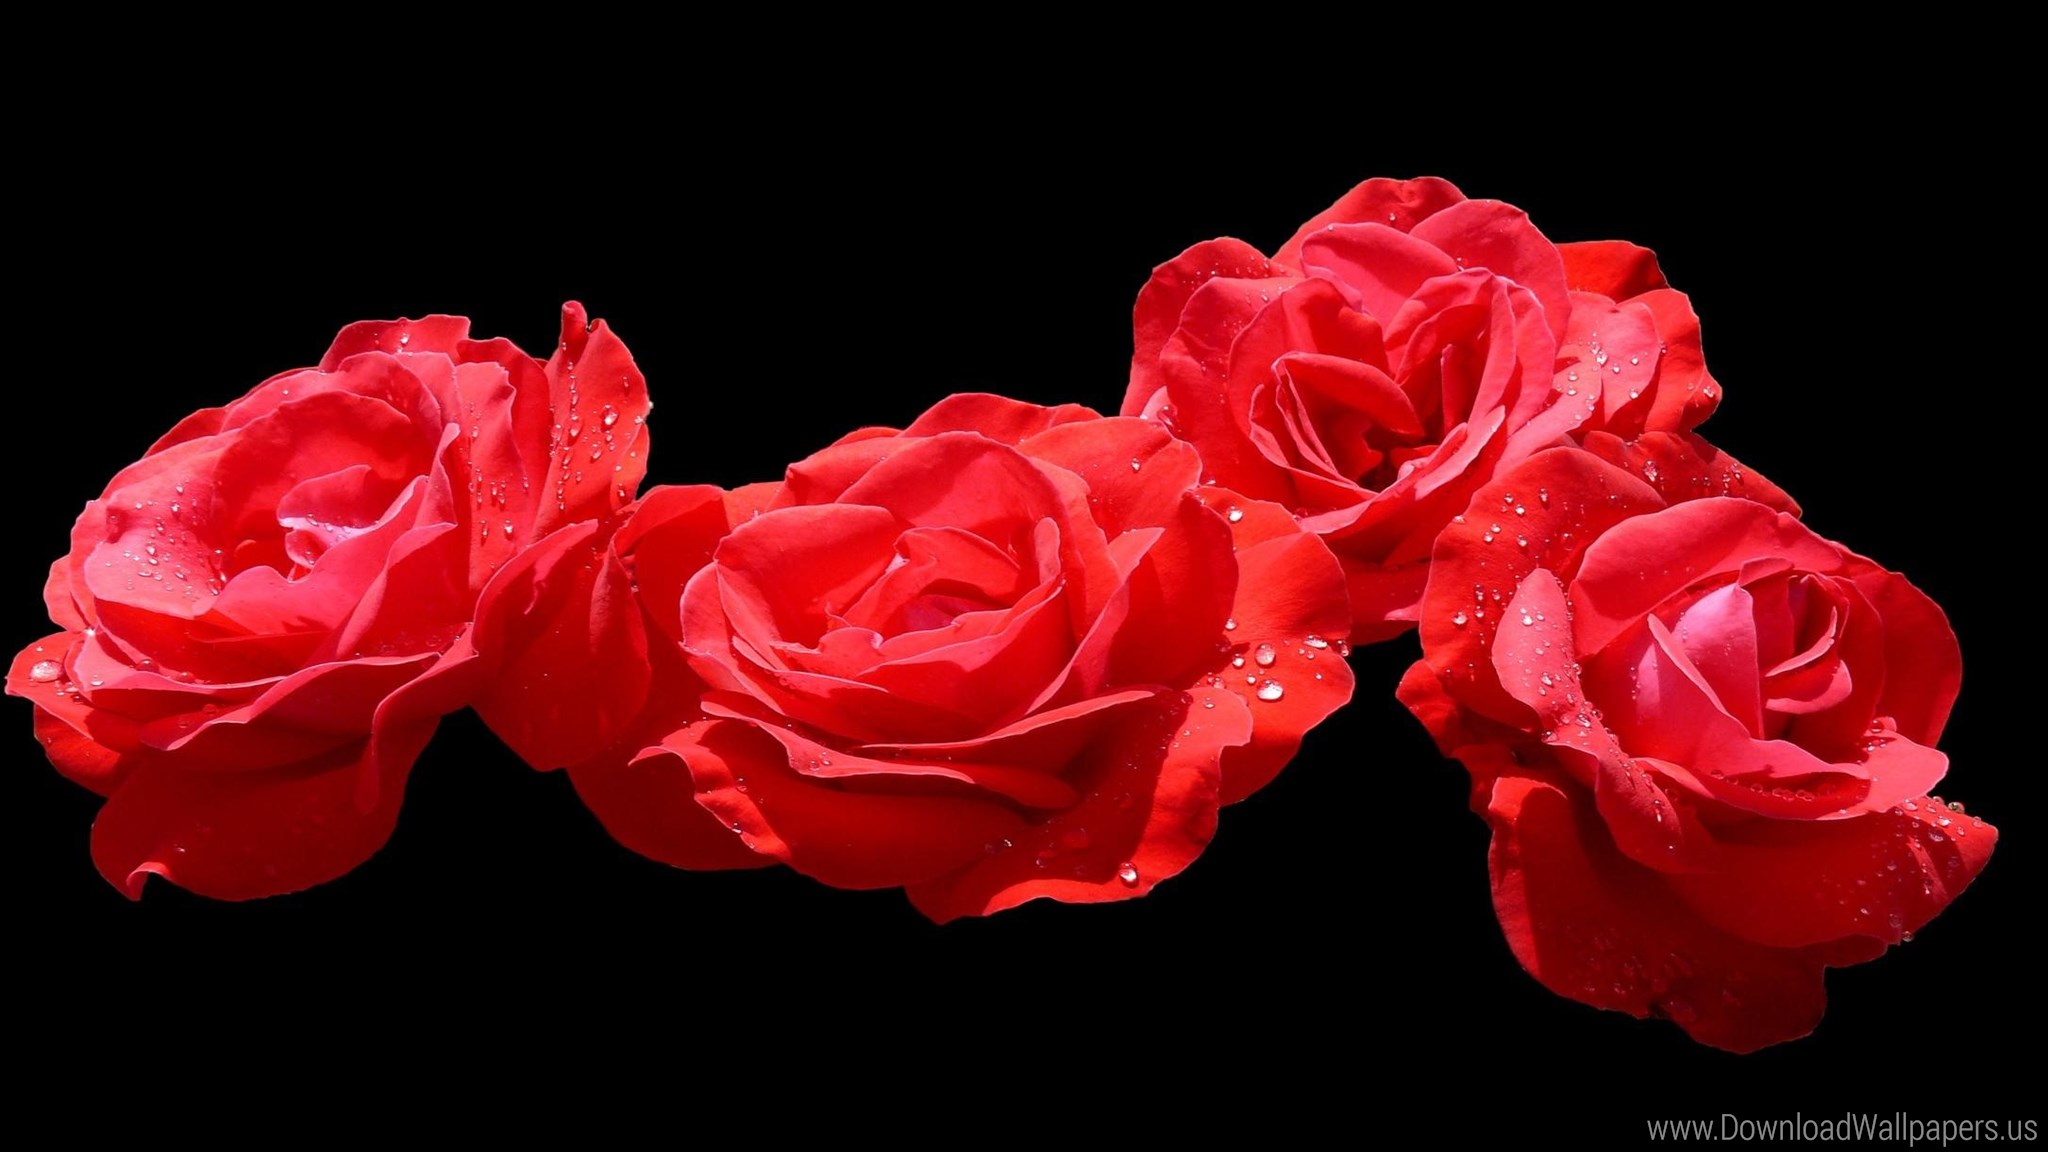 Download Dual Screen Wide - Red Rose In Black Background , HD Wallpaper & Backgrounds